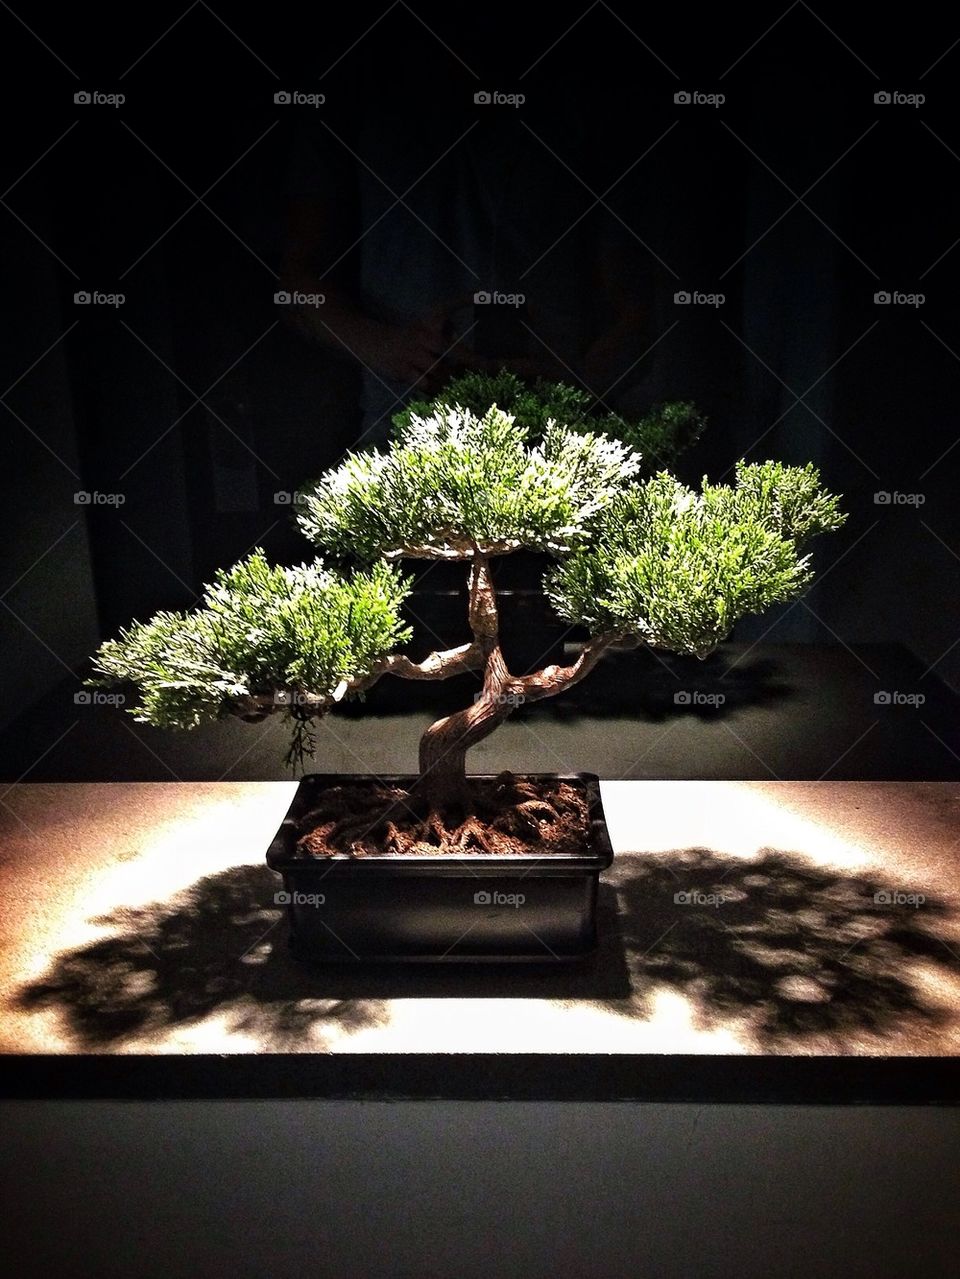 thompson les hotel bonsai tree united states new york by LordHouse